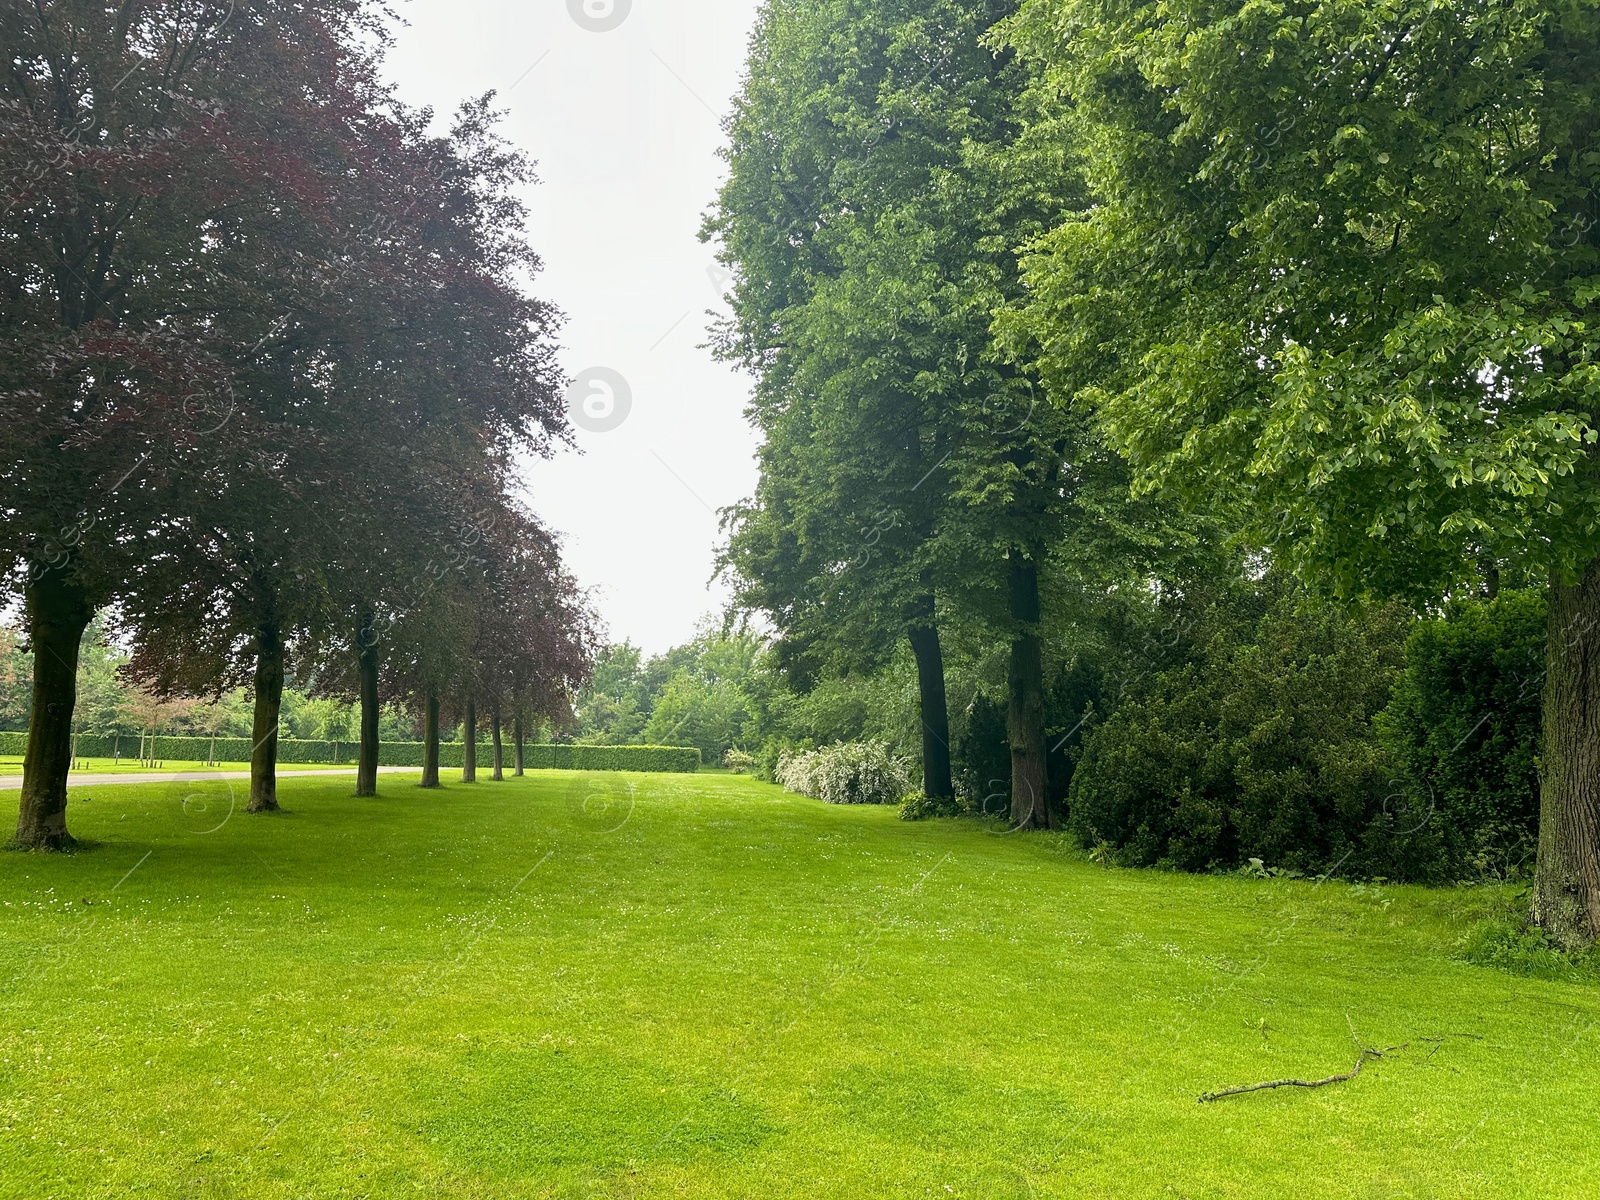 Photo of Picturesque view of trees and green grass in park